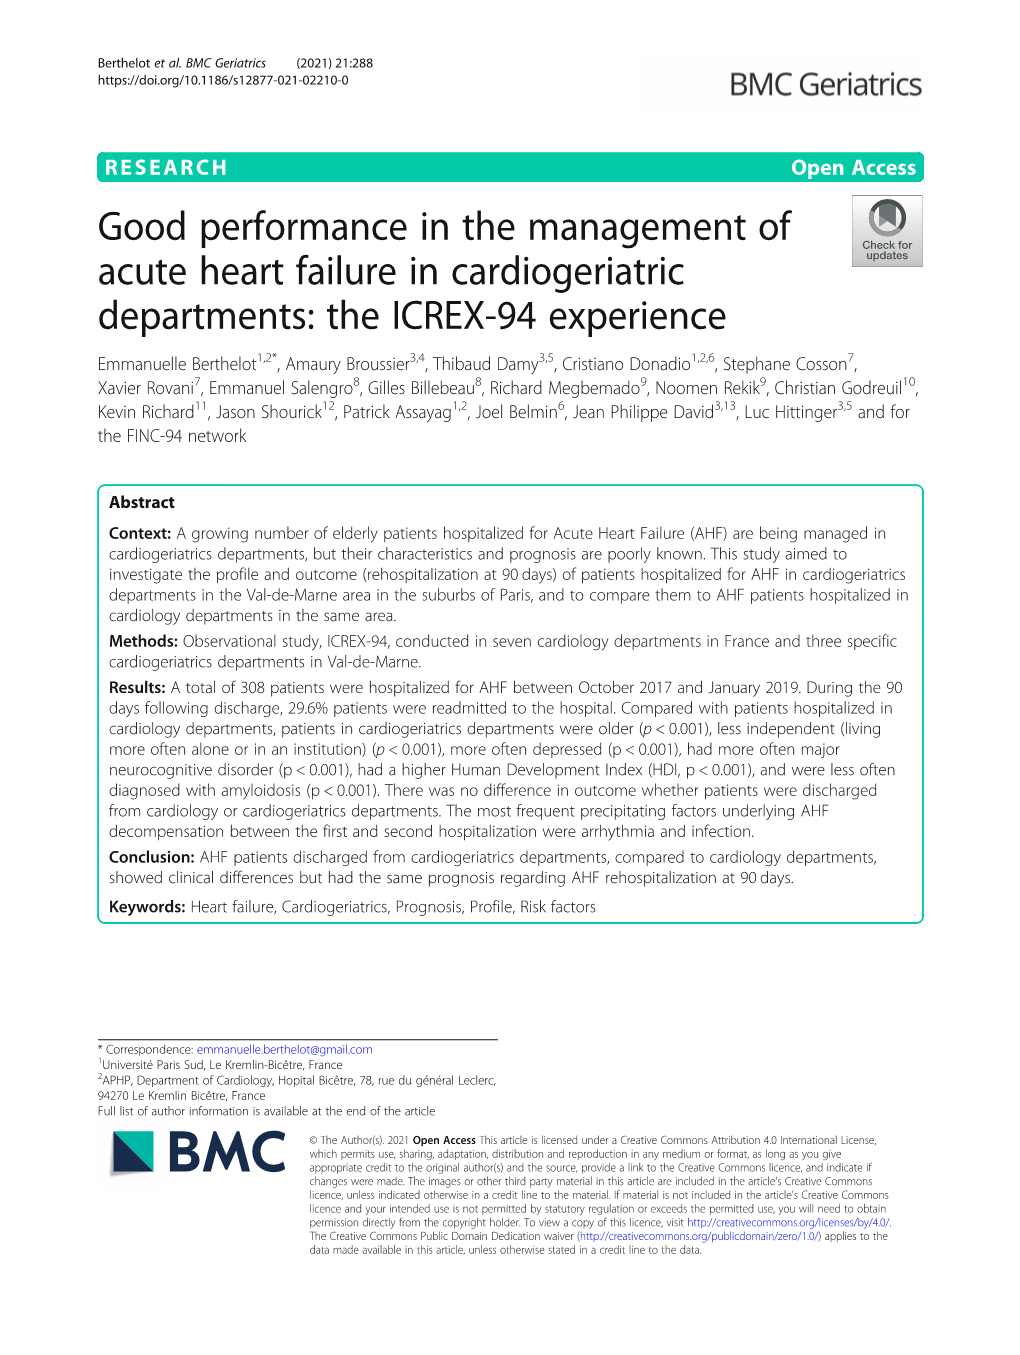 Good Performance in the Management Of